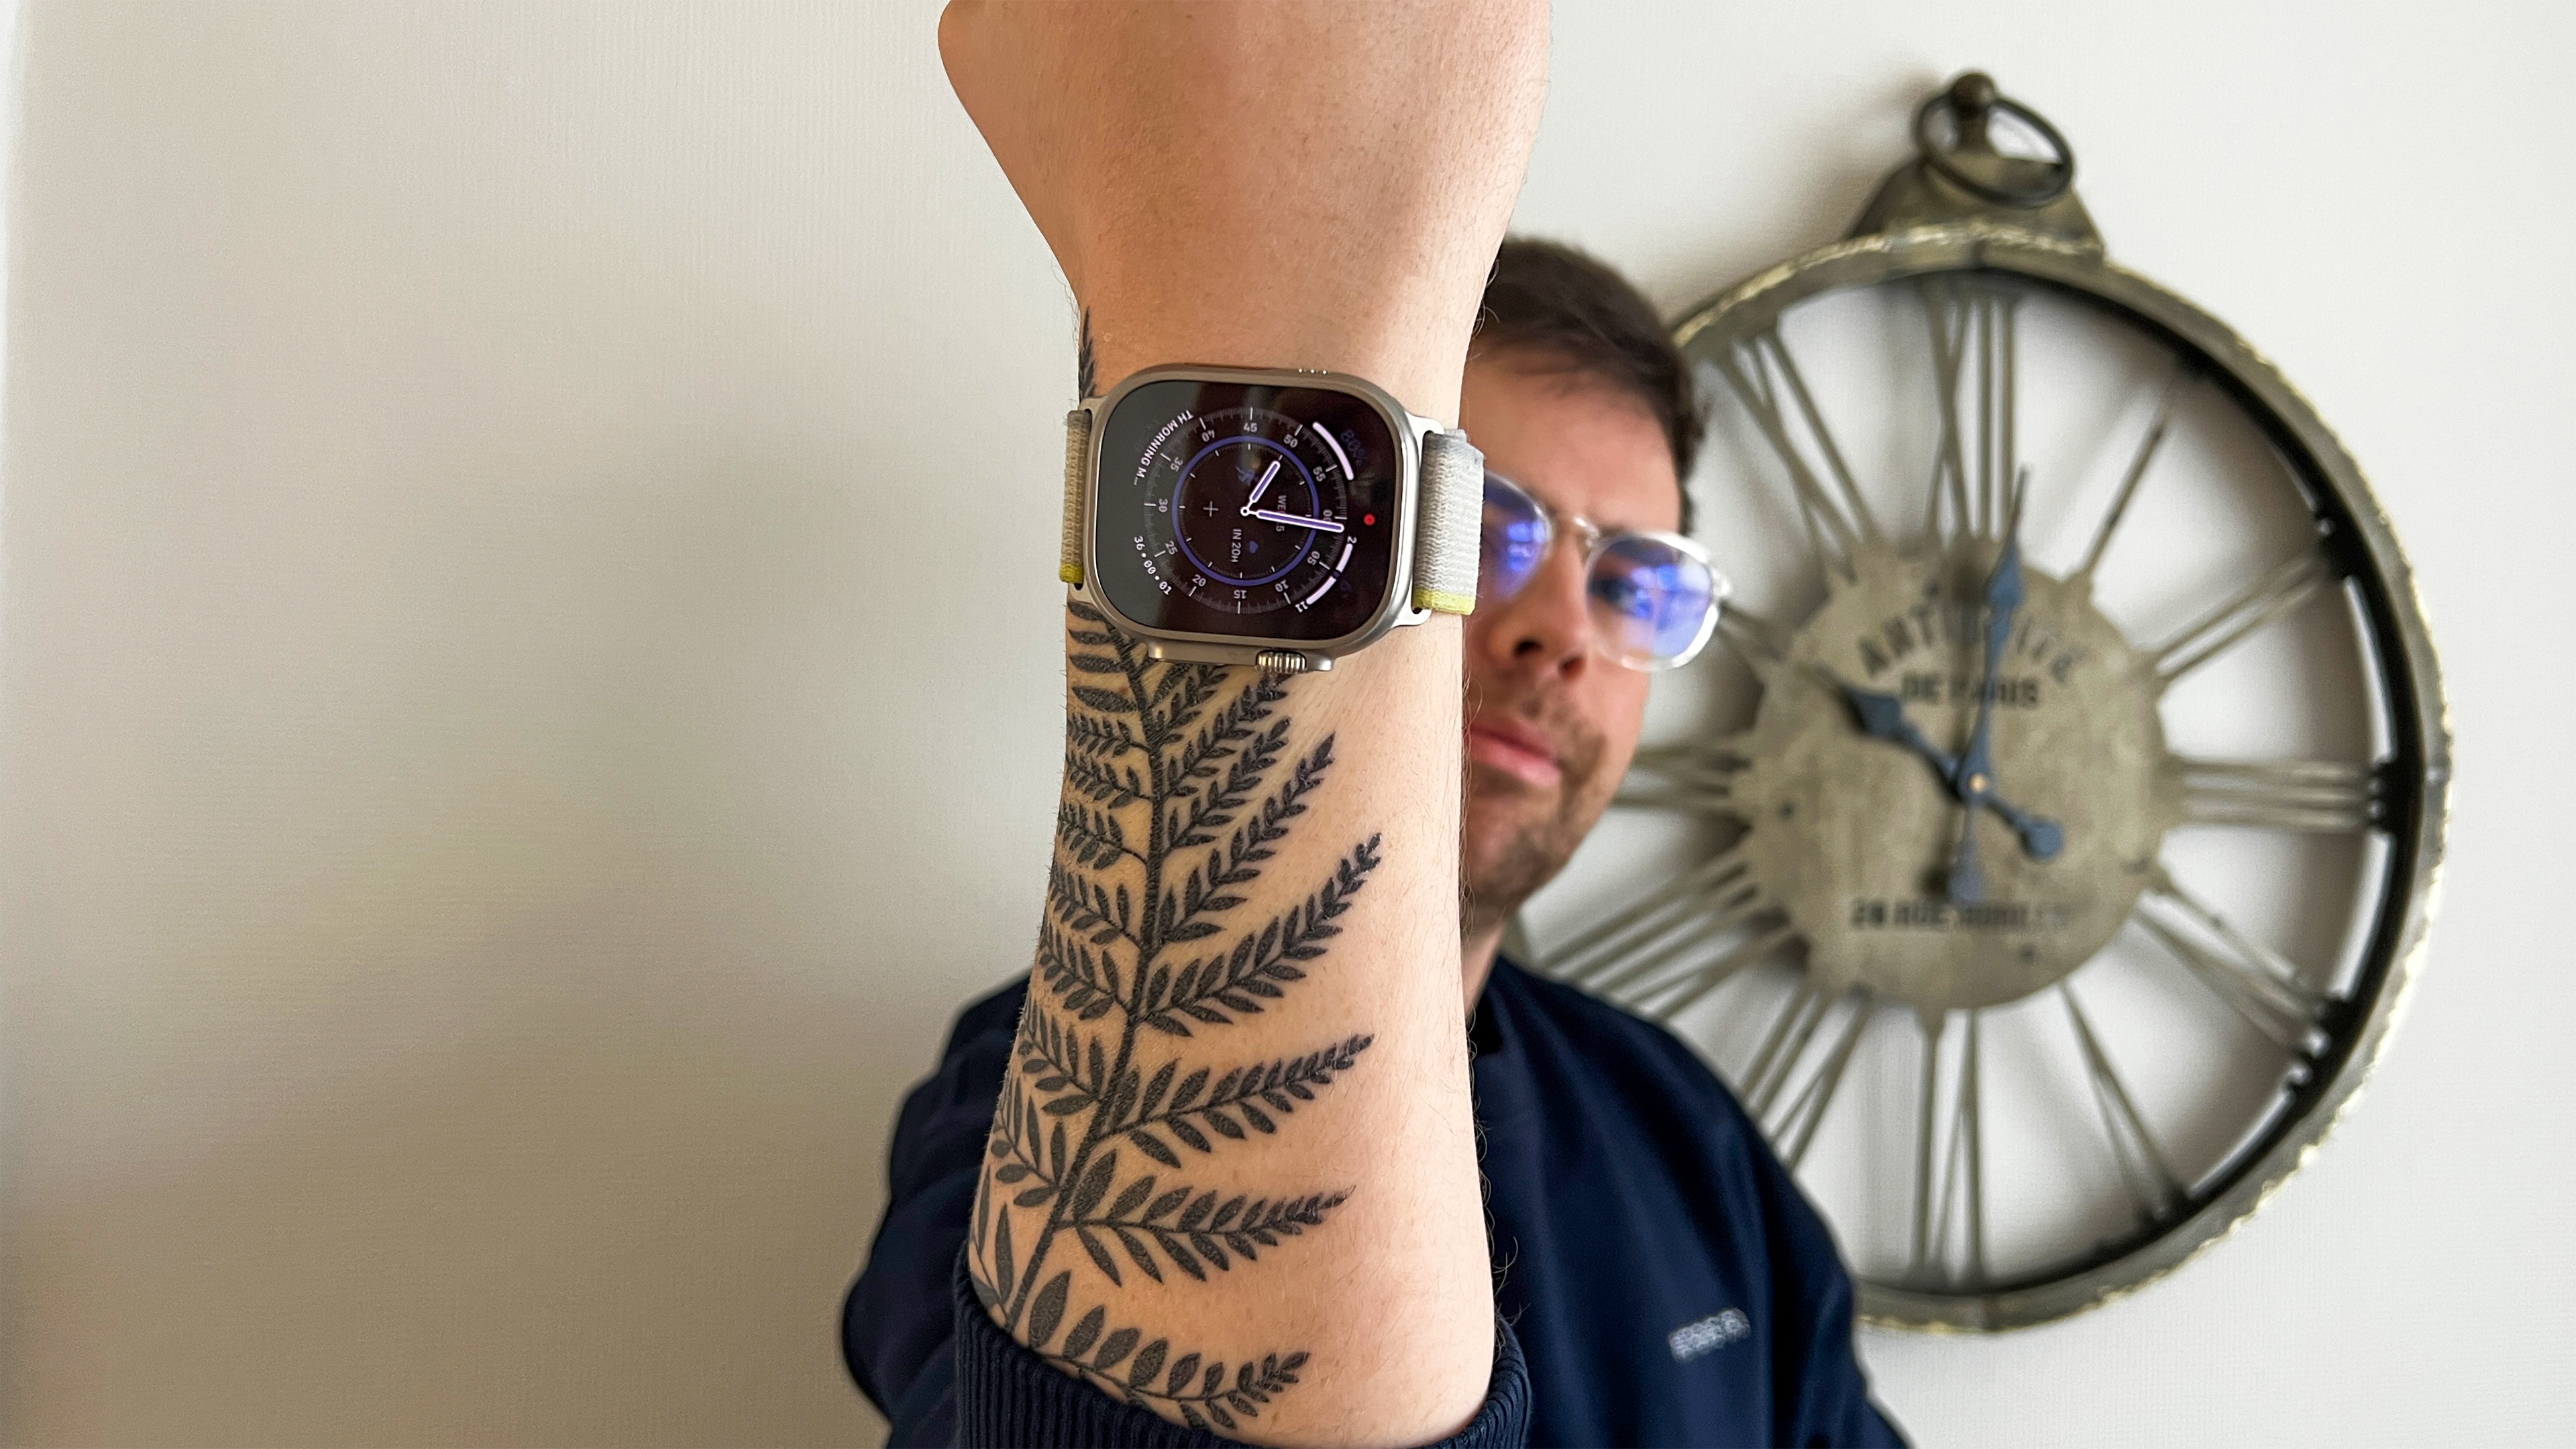 Apple Watch Ultra review: Does this wearable benefit non-fitness